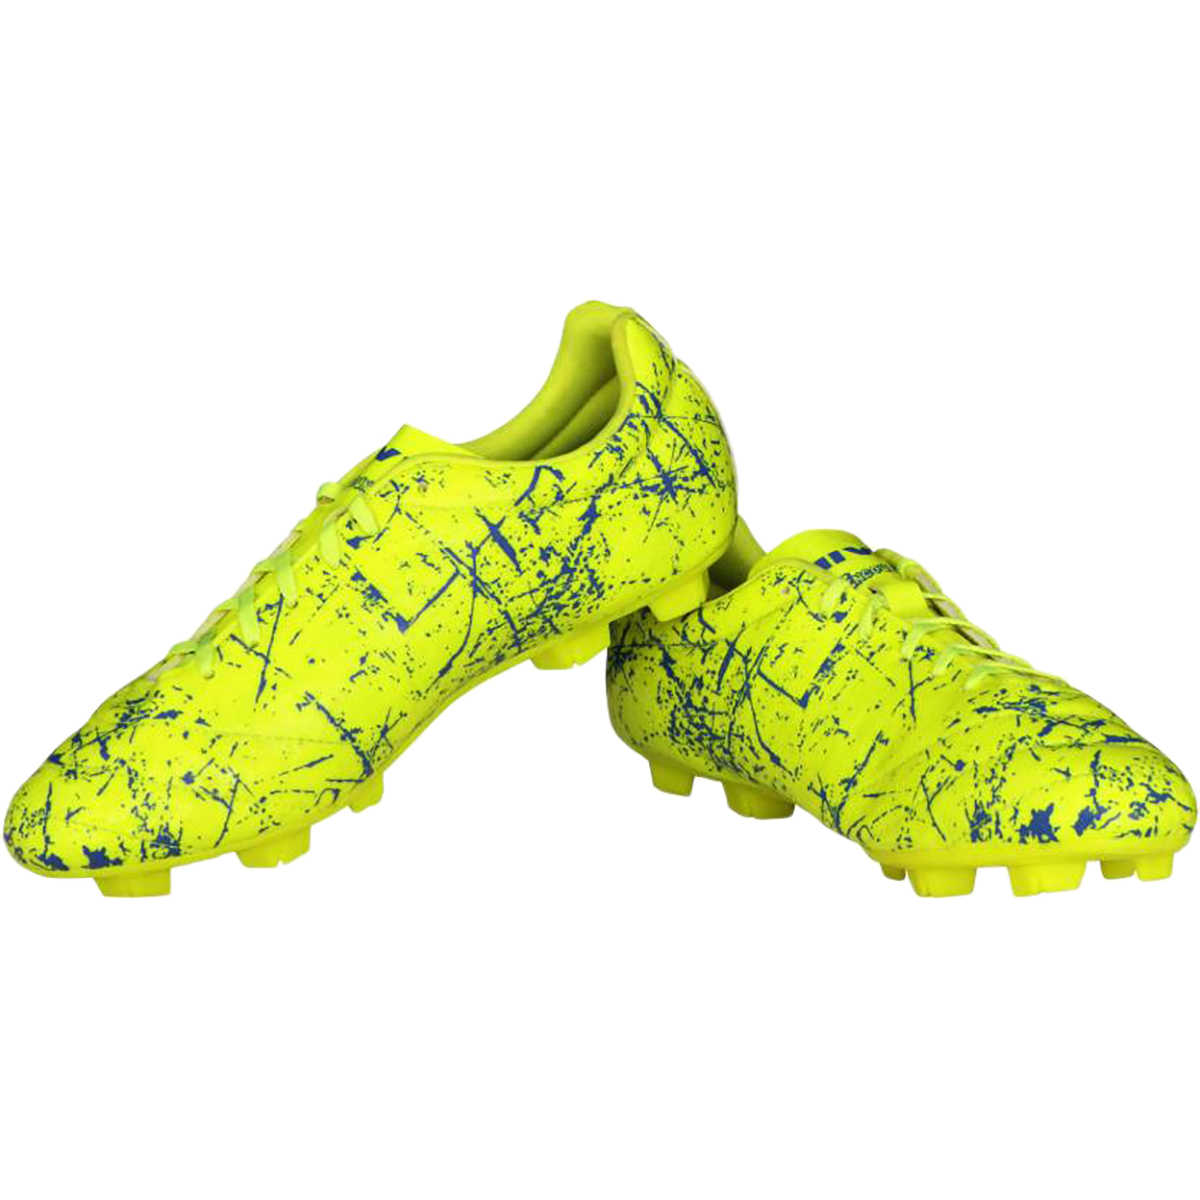 Sega Legend Outdoor Football Shoes (Silver) at lowest price online -  chendlasports.co.in